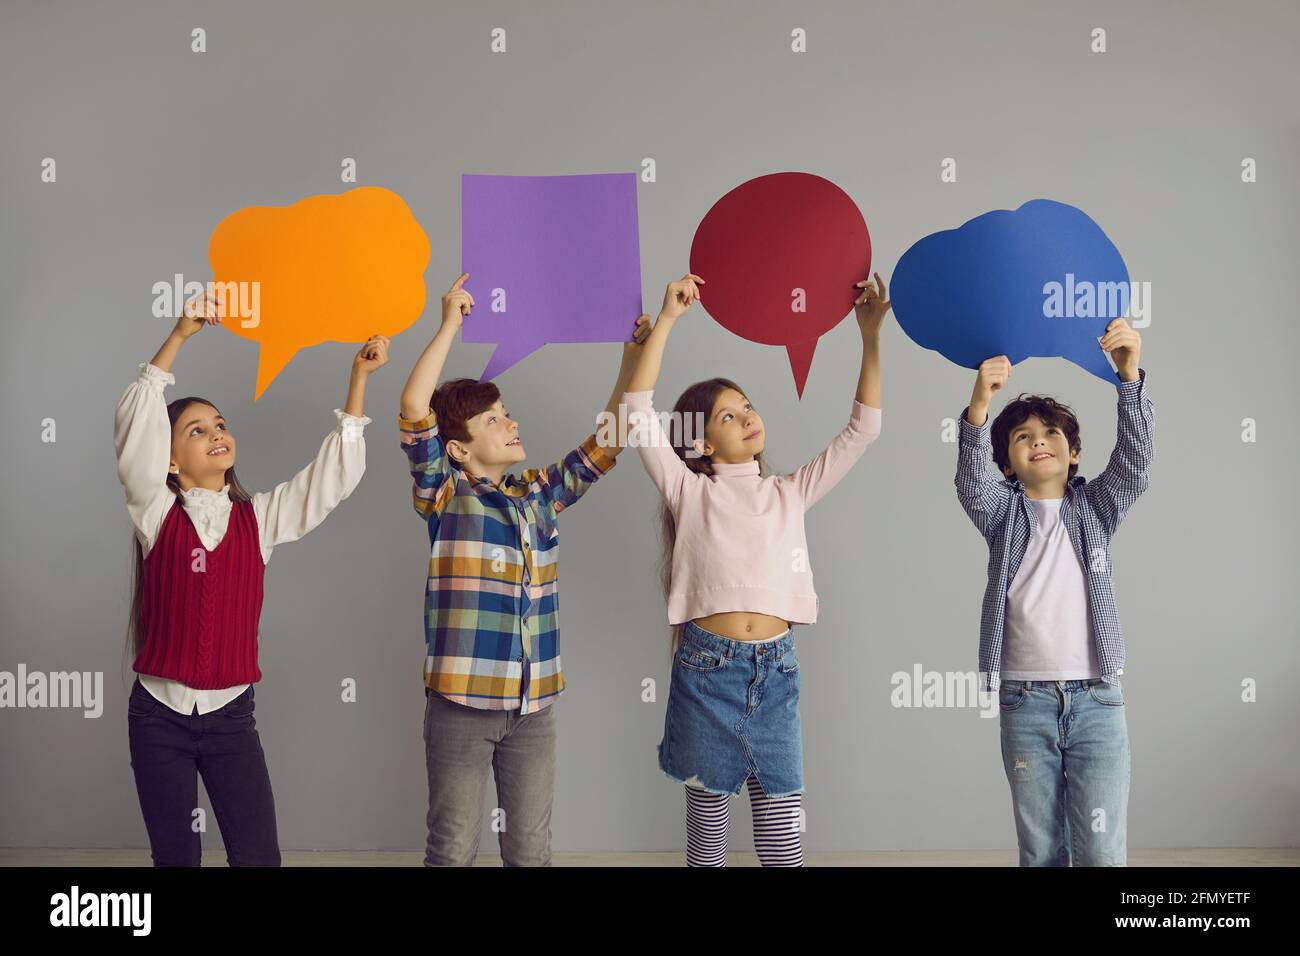 Group of happy little kids standing in studio and holding up multicolored speech bubbles Stock Photo